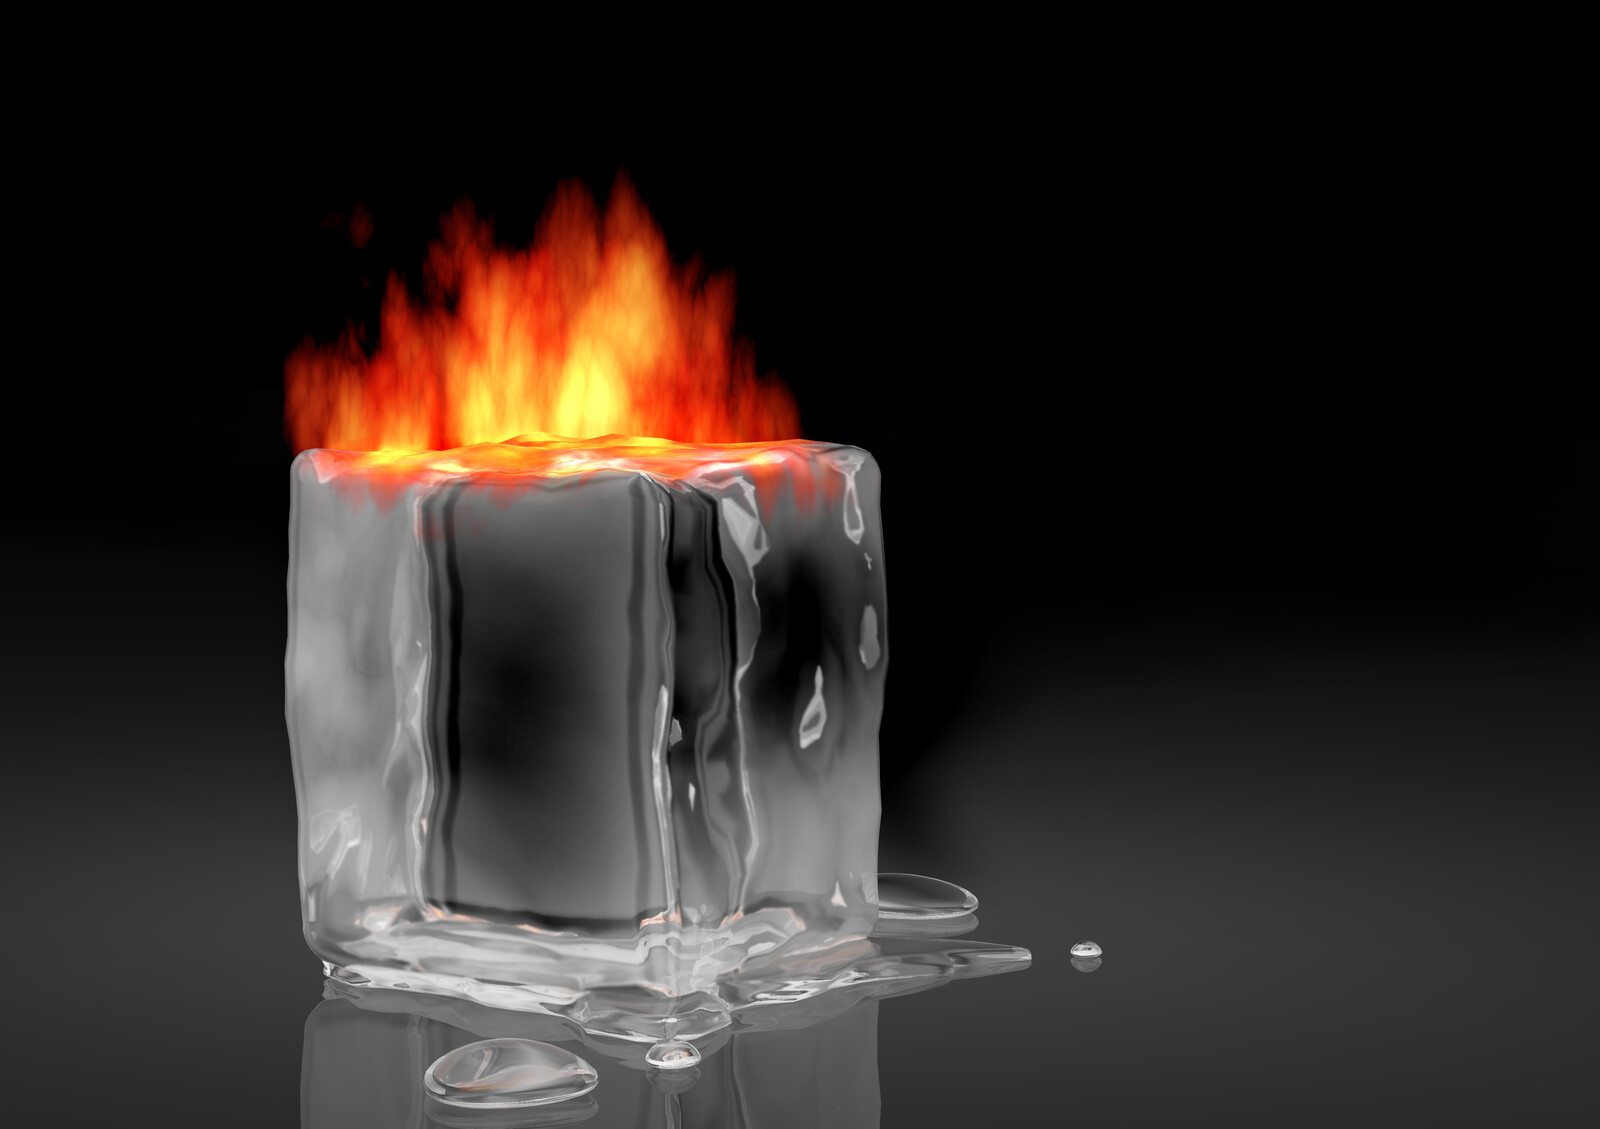 ice on fire. Early artwork of mine created a 3D scene of an Ice with a fire effect on top. Another entry I submitted for the monthly themed "Contrast".